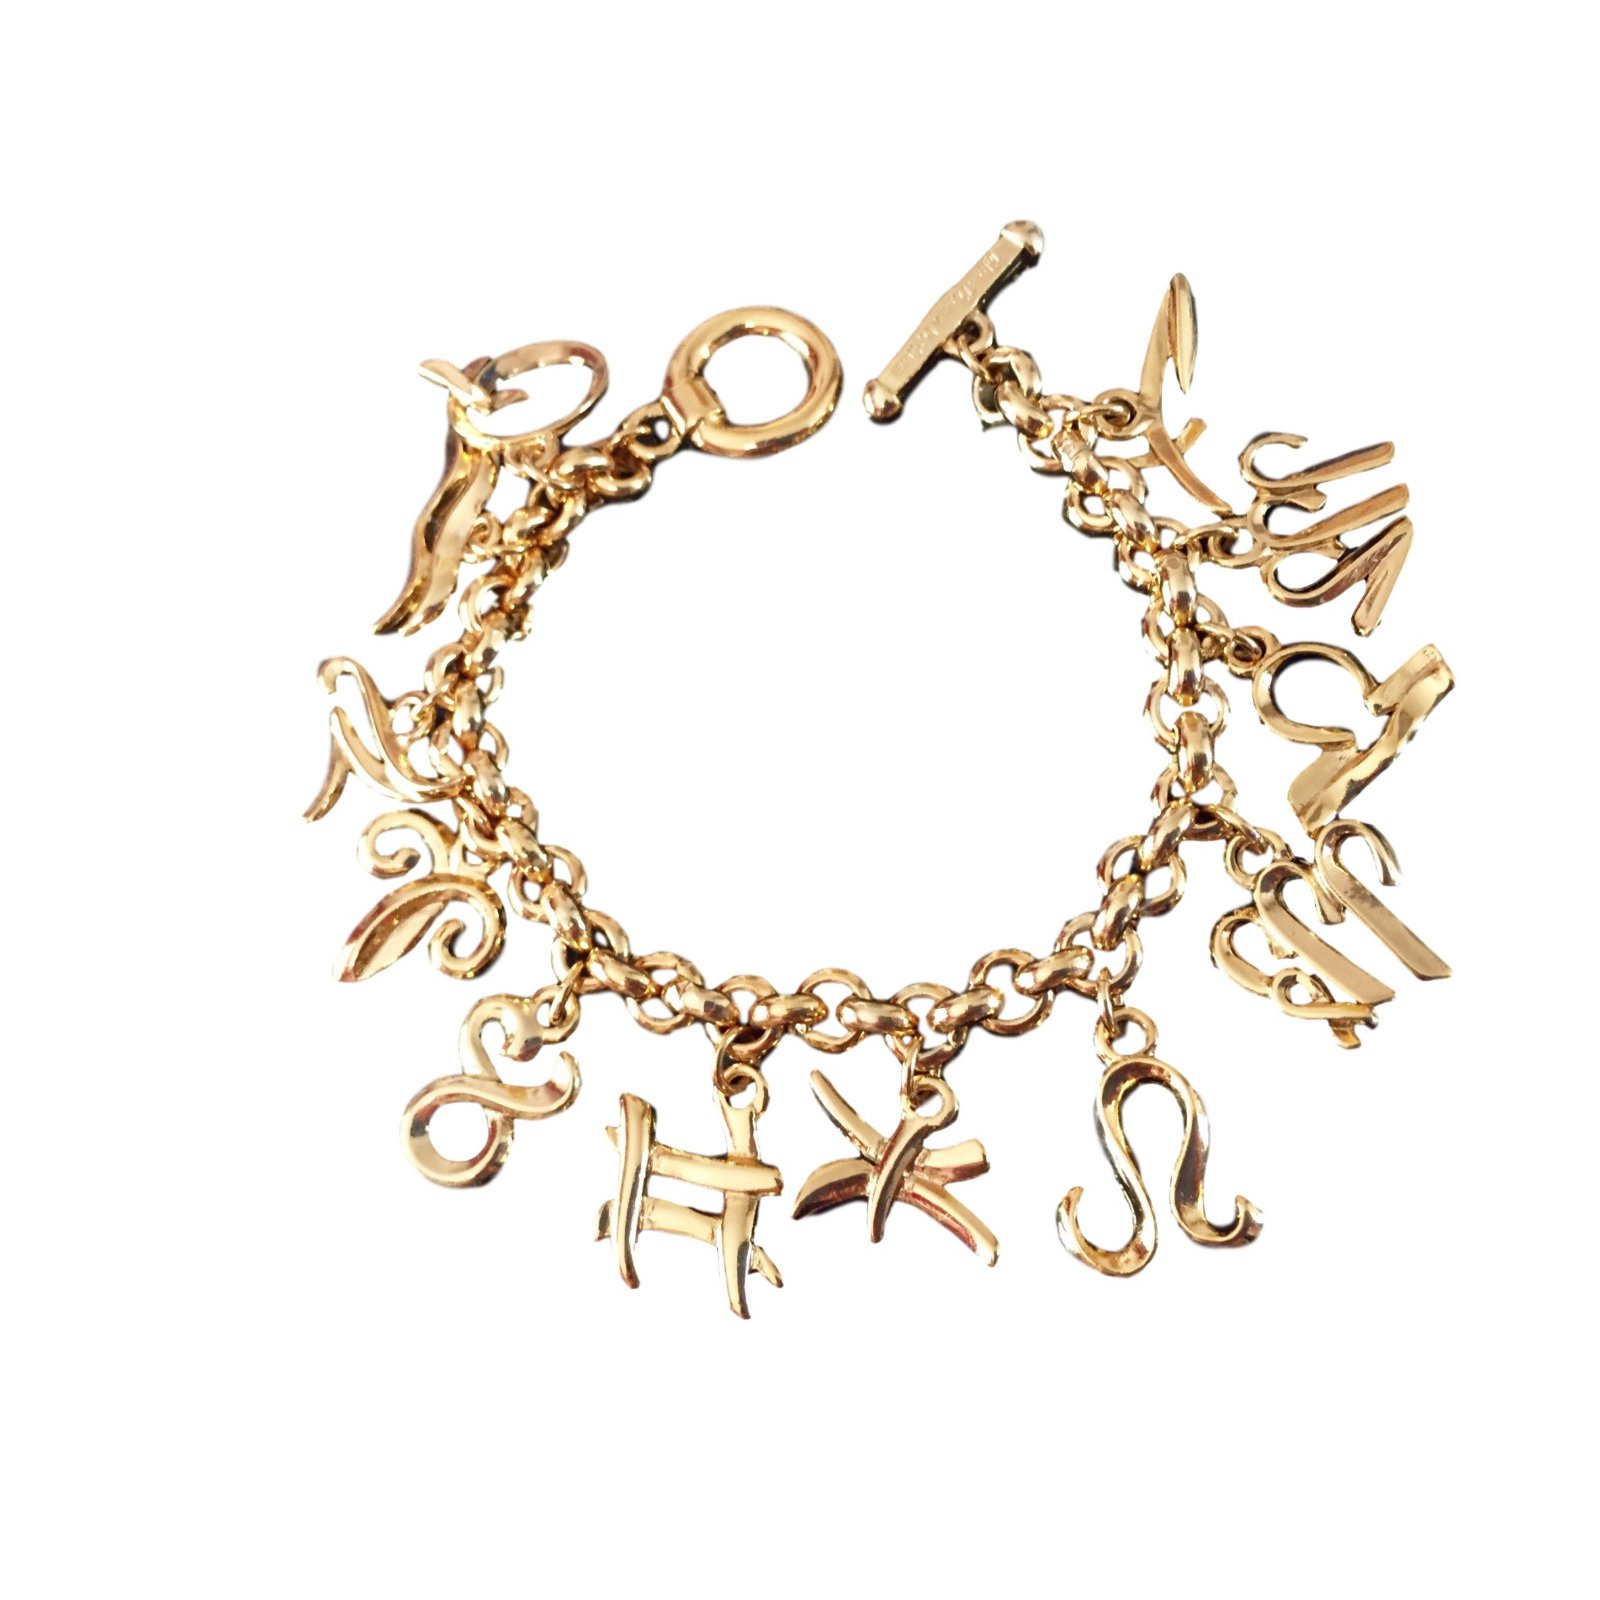 Sold at Auction: Paloma Picasso bracelet for Tiffany and Co. authentic and  signed Gold and Multi-Gem Bracelet